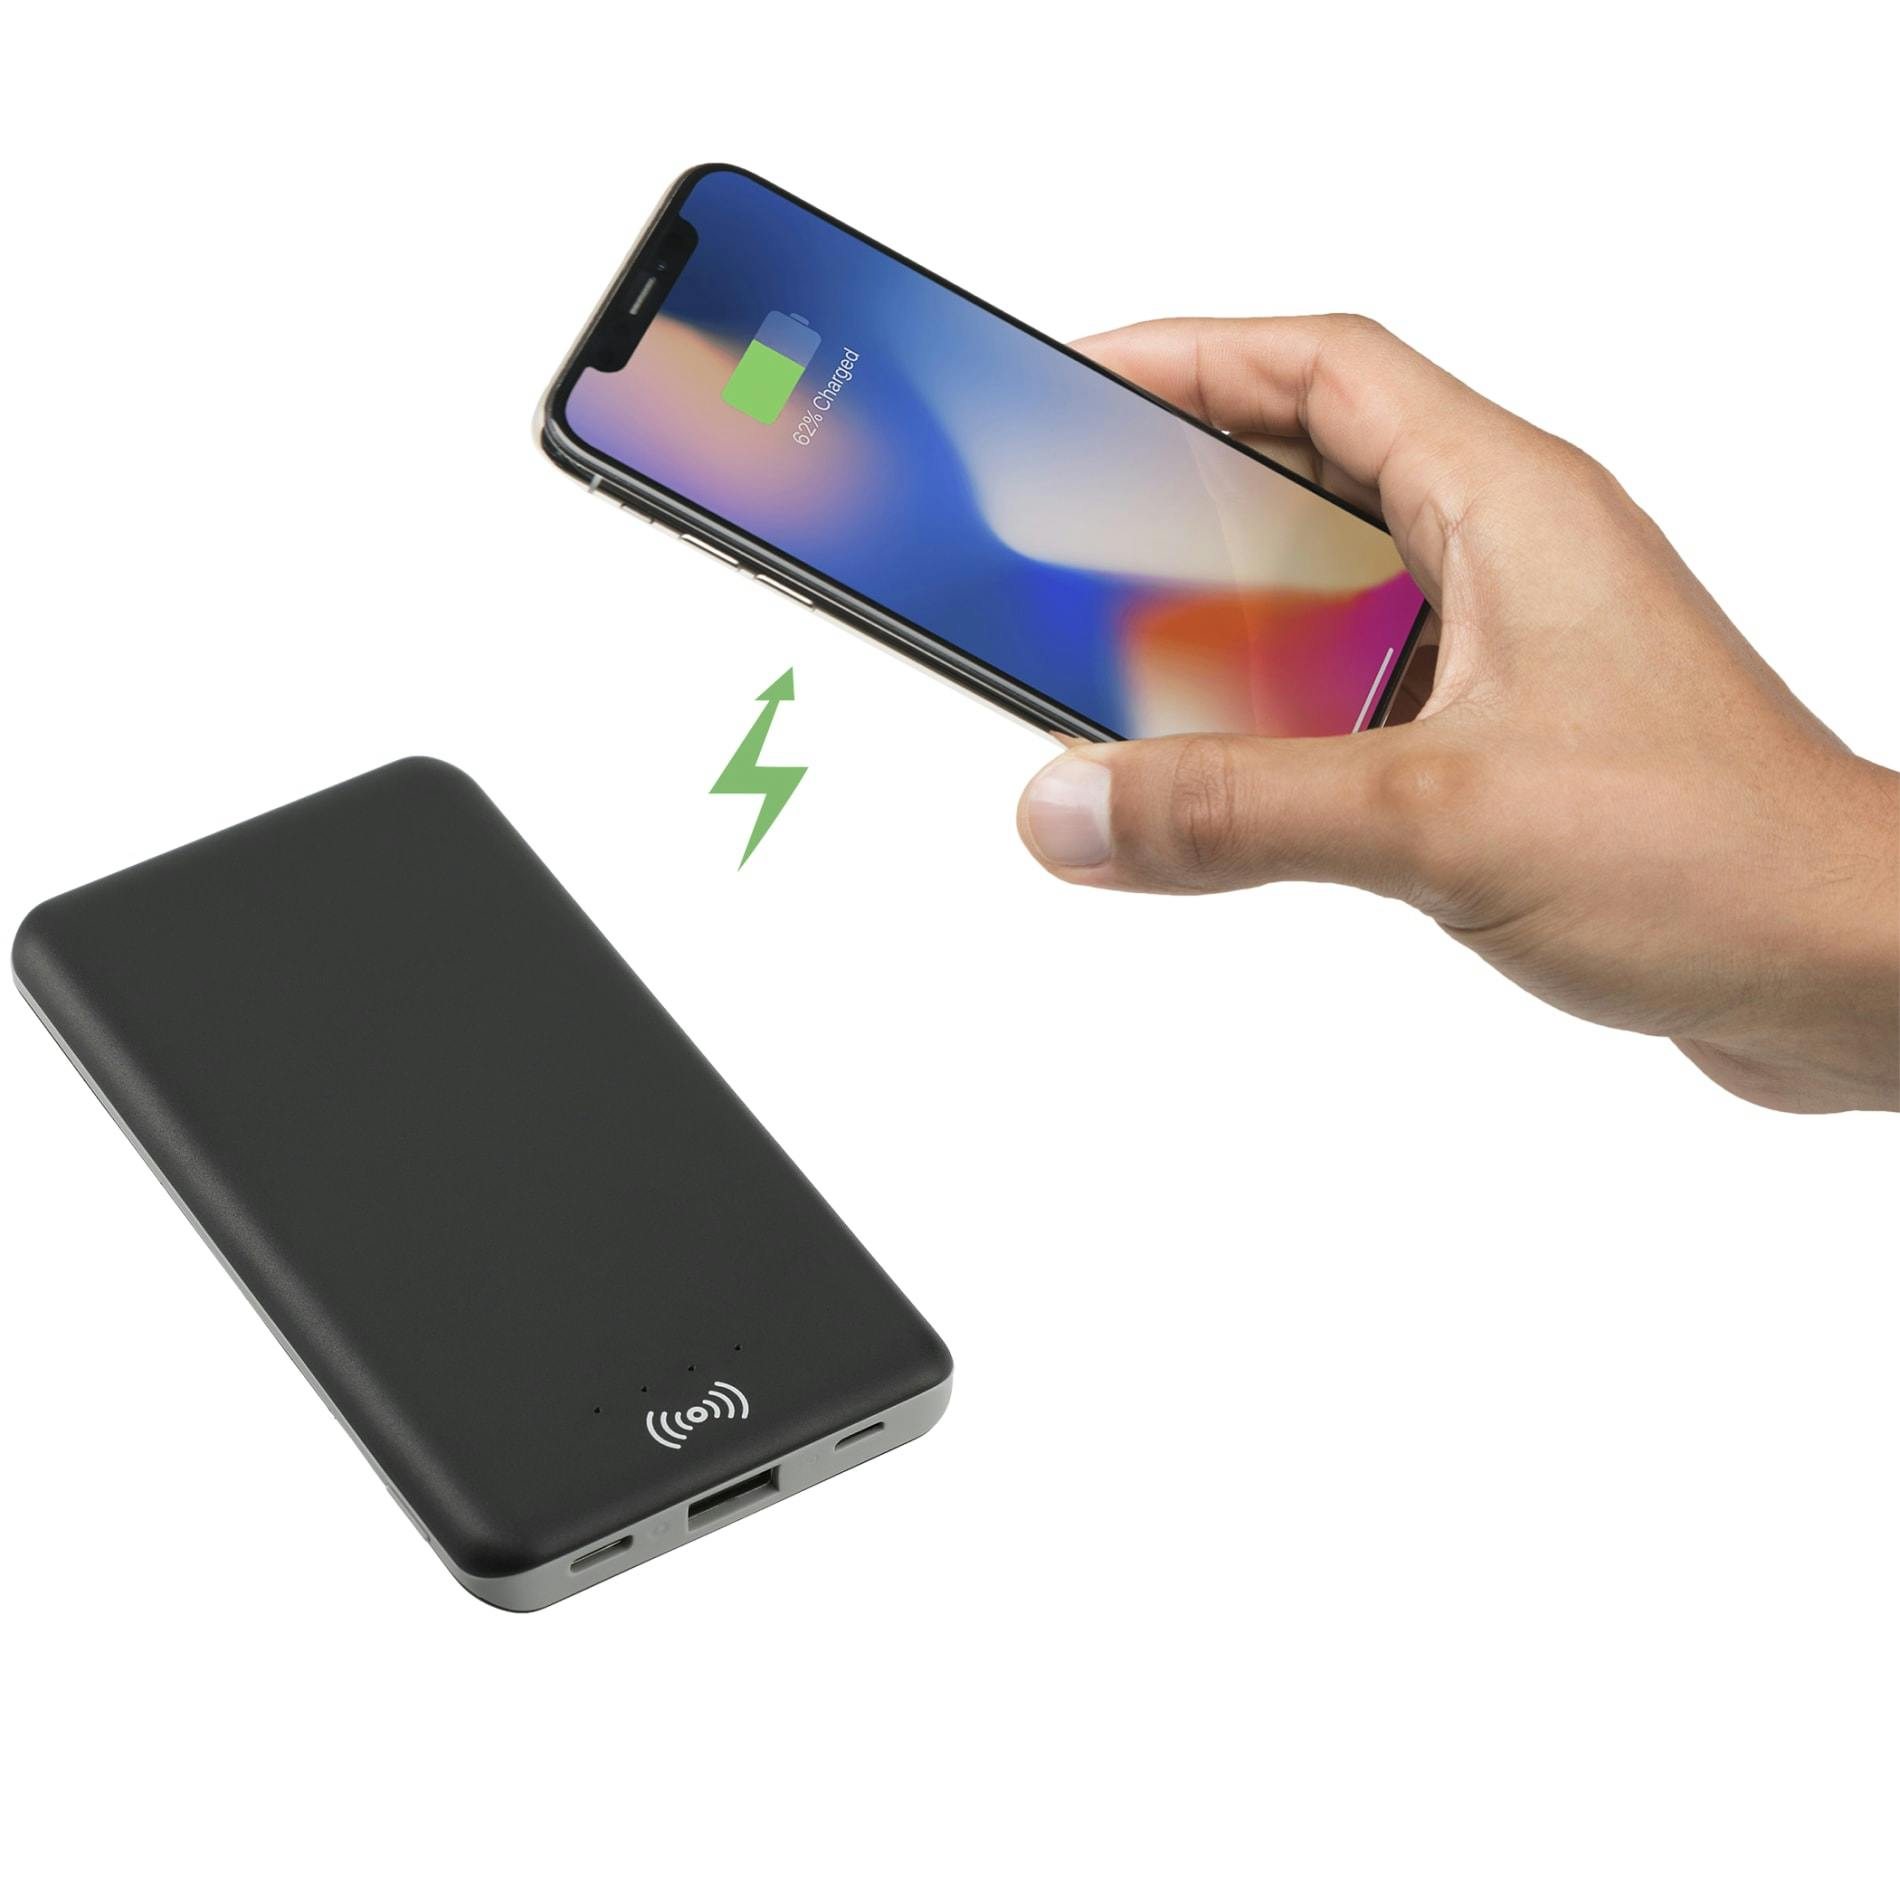 Axial 4000 mAh Wireless Power Bank - additional Image 3